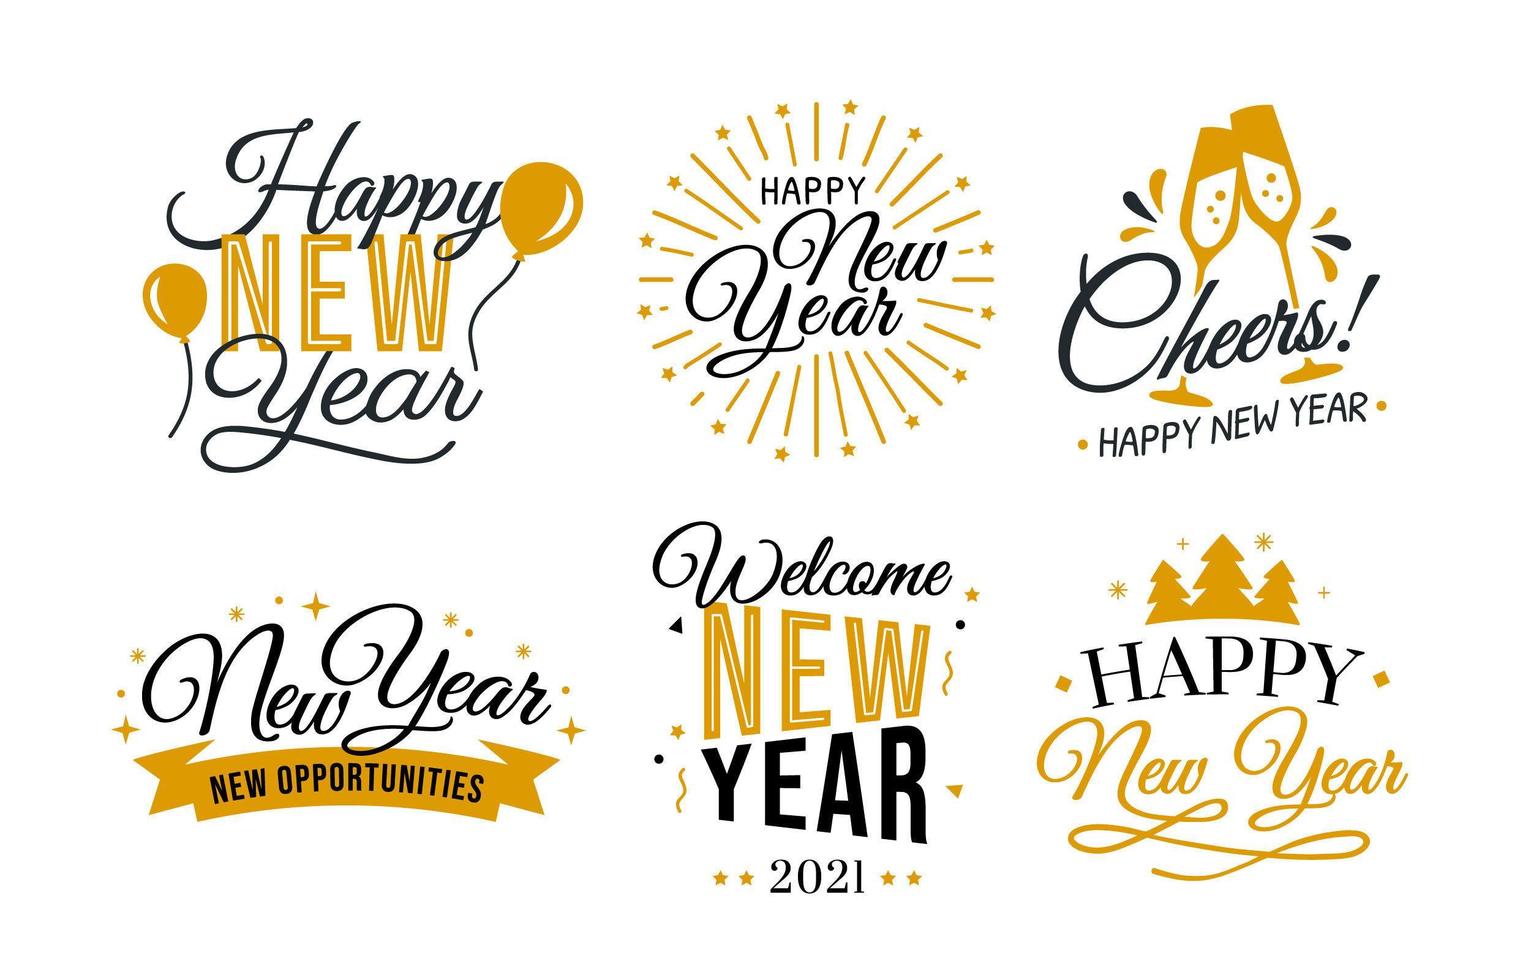 Happy New Year Calligraphy Greetings vector